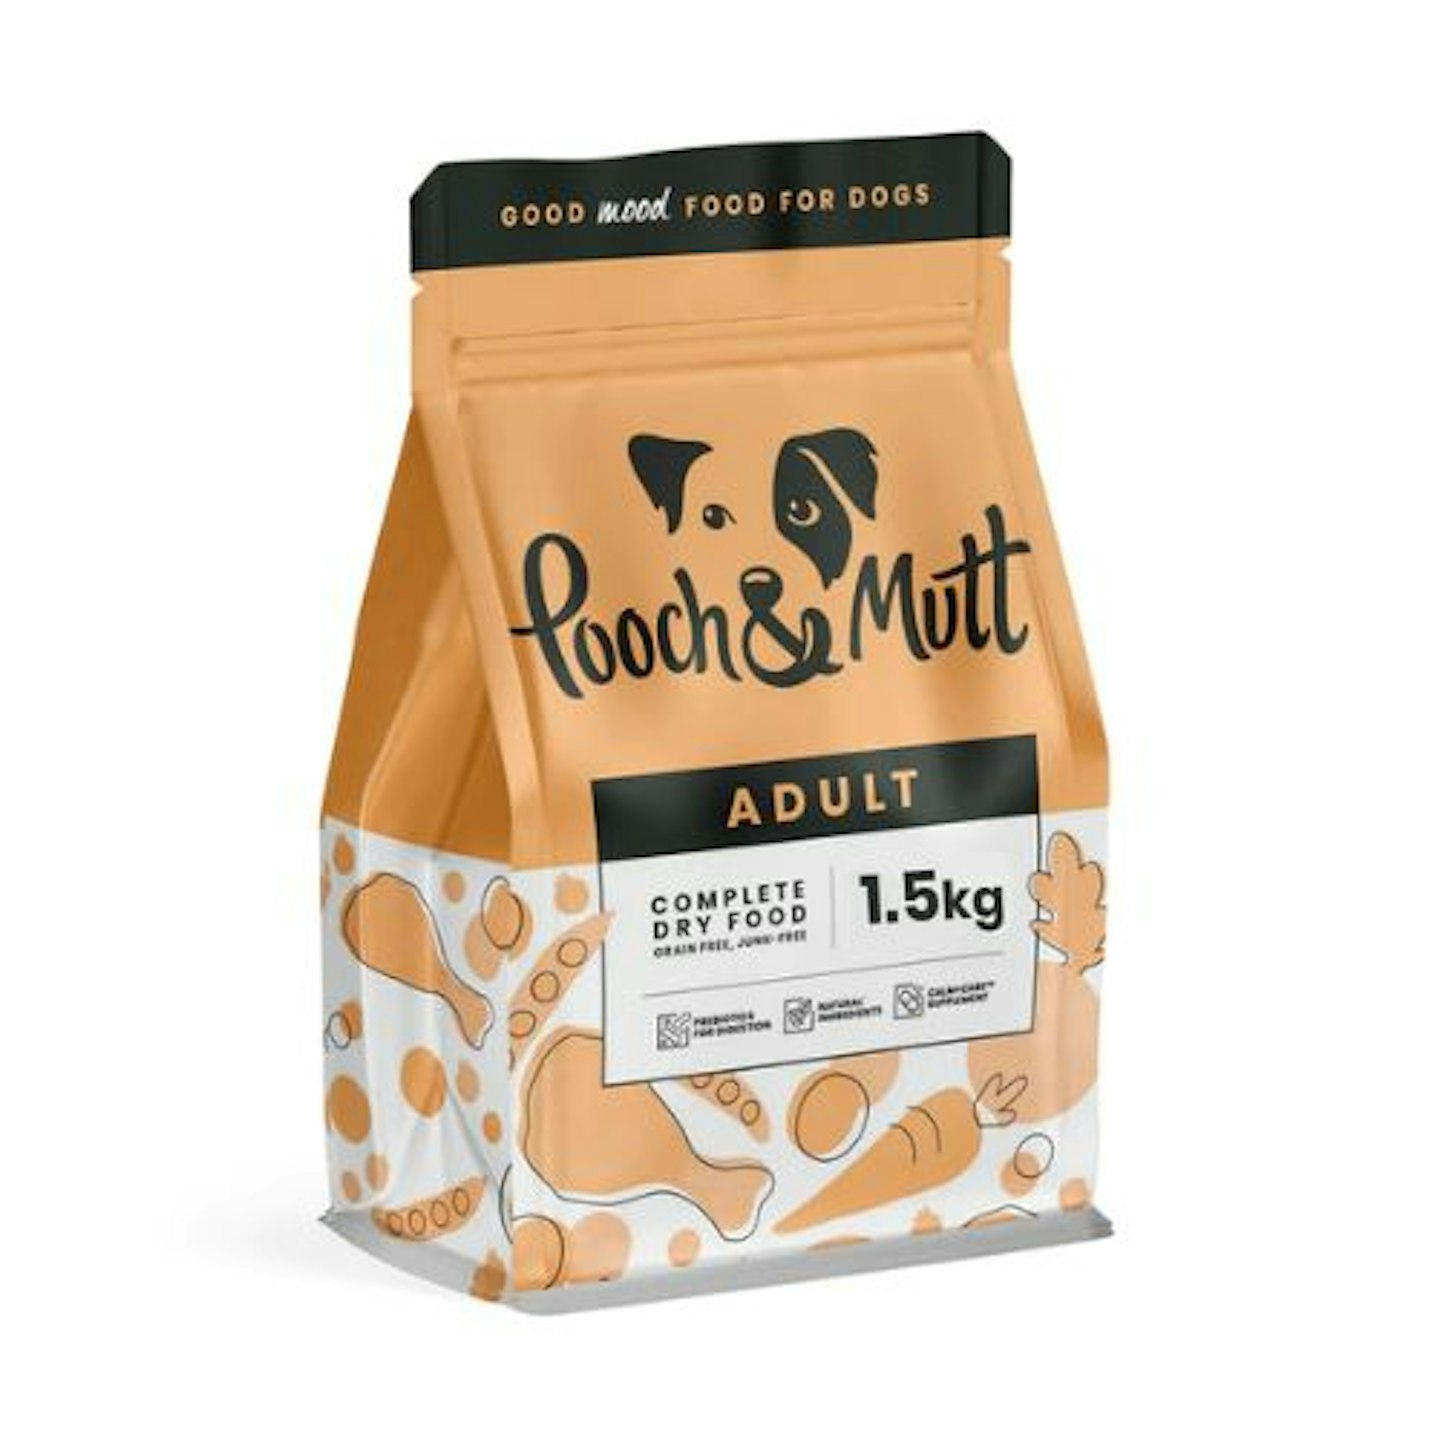 Pooch + Mutt, Adult Complete Superfood – 1.5kg